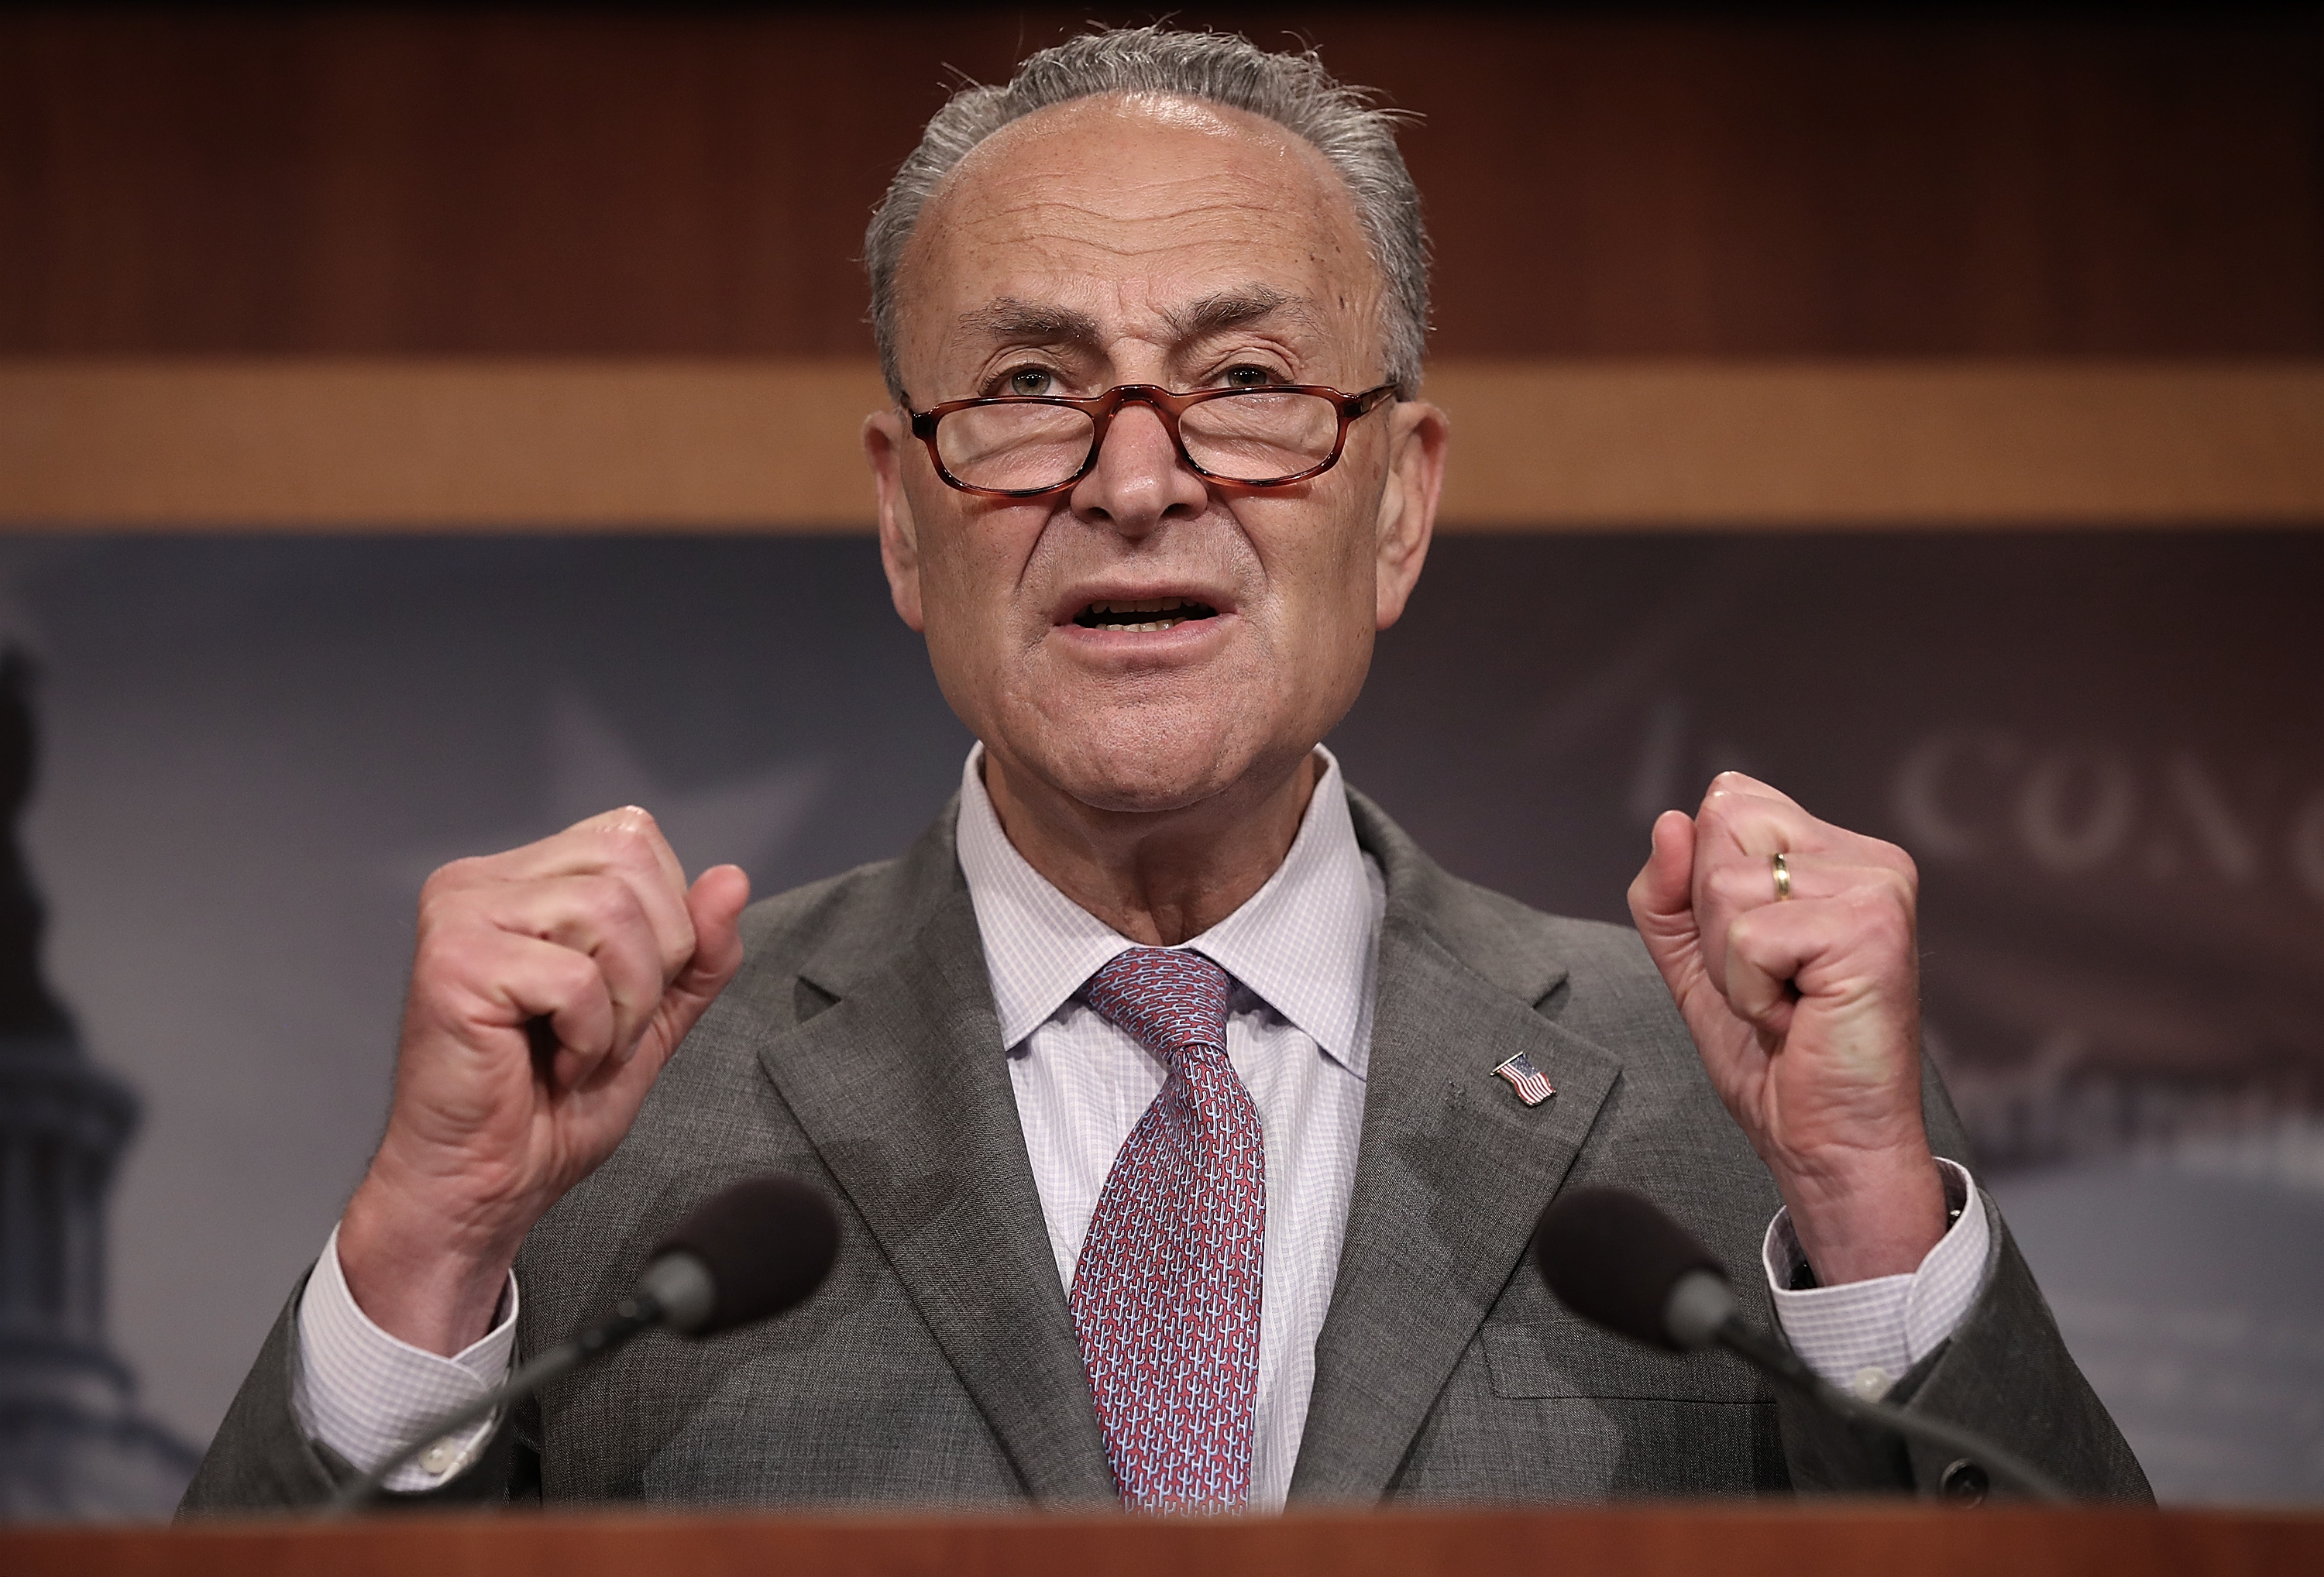 Senate Minority Leader Chuck Schumer (D-NY) speaks during a press conference at the U.S. Capitol July 13, 2017 in Washington, DC. (Win McNamee—Getty Images)